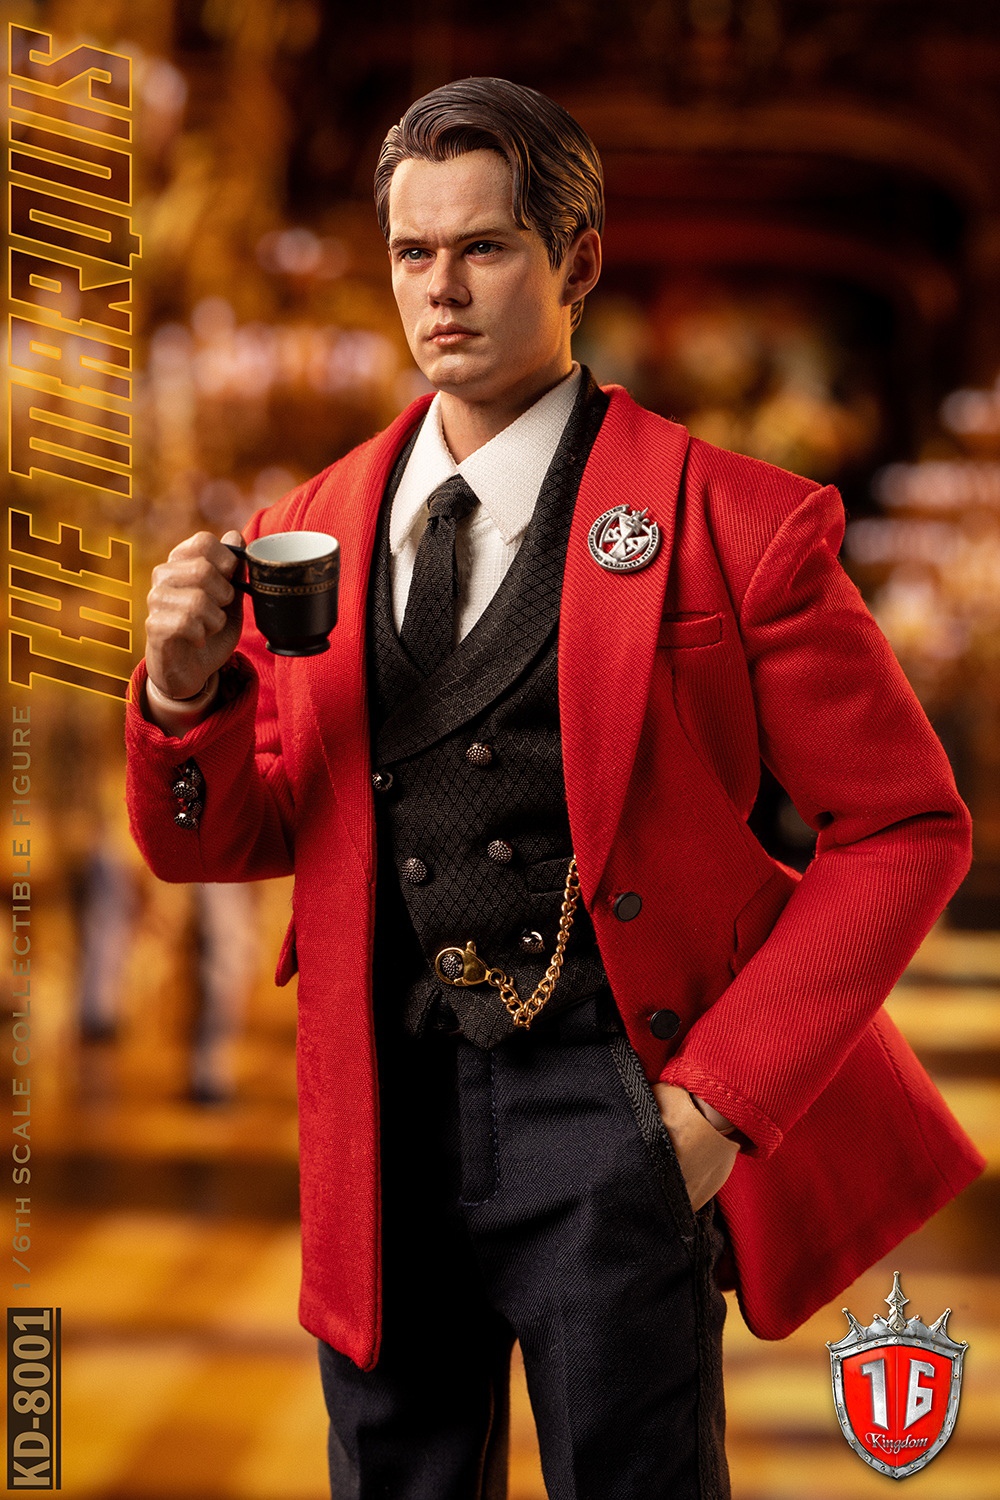 NEW PRODUCT: Kingdom: 1/6 The Marquis Action Figure KD-8001 11401010